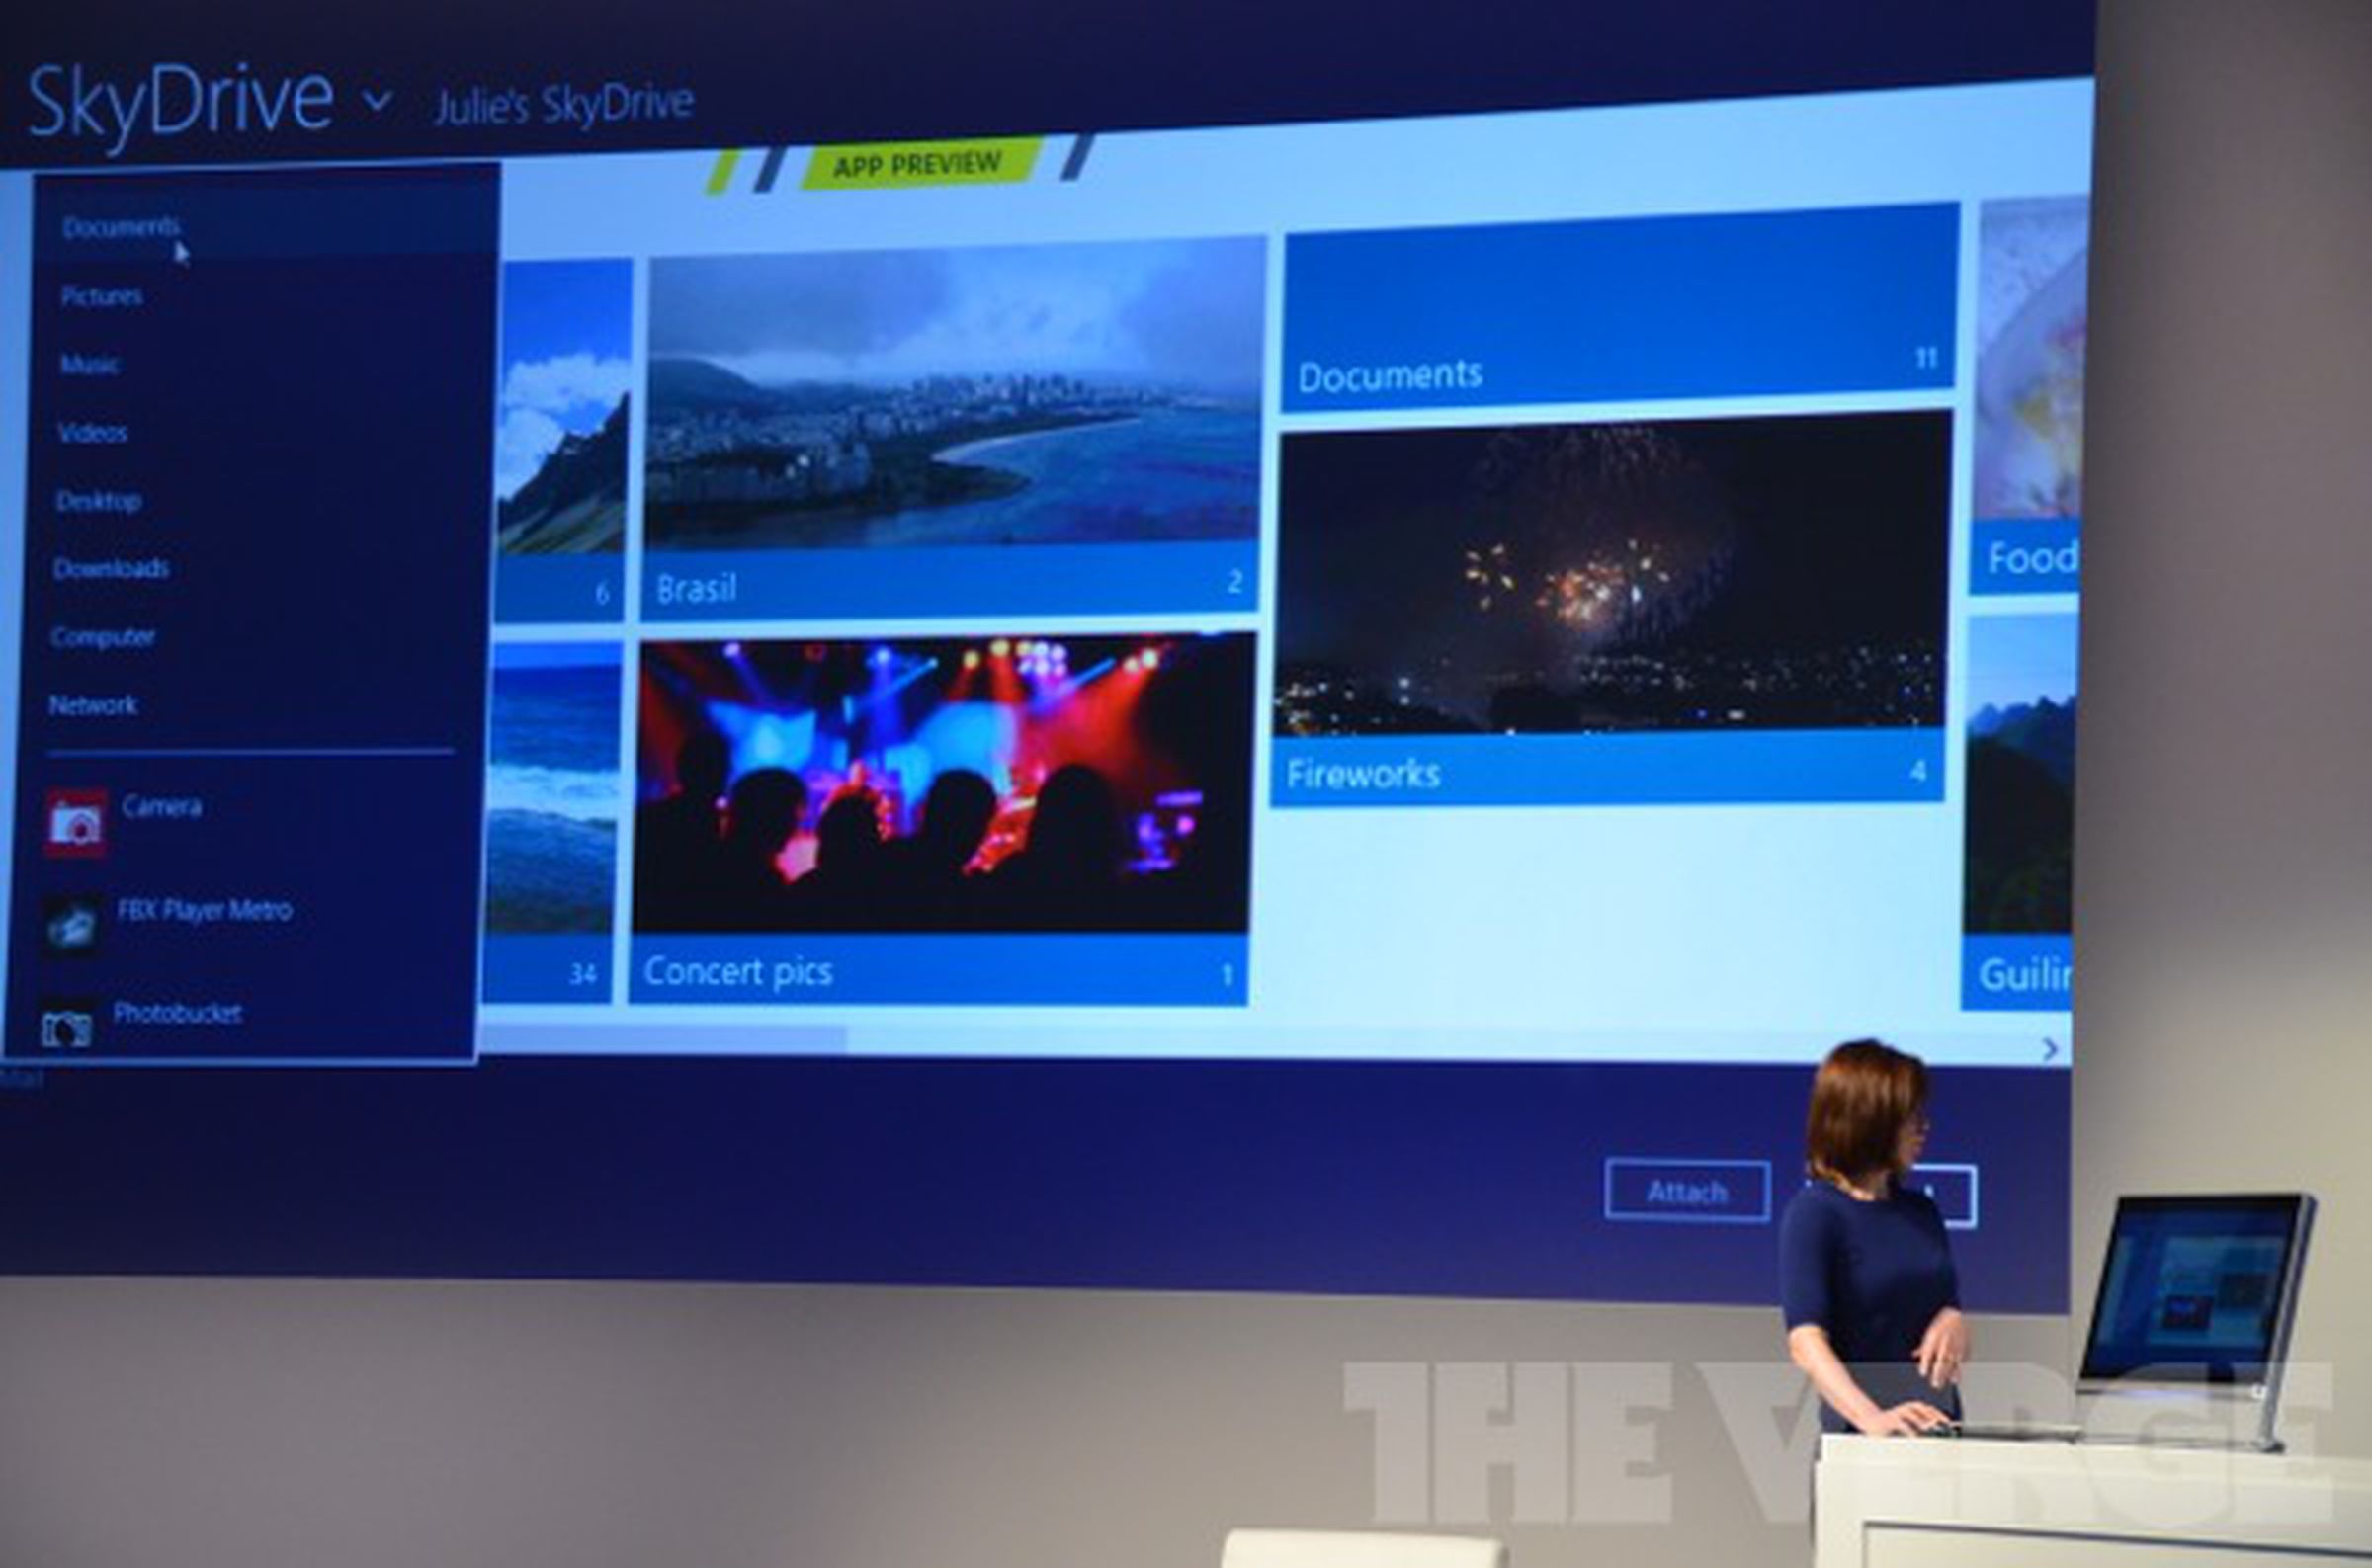 Windows 8 Apps MWC Demo Gallery